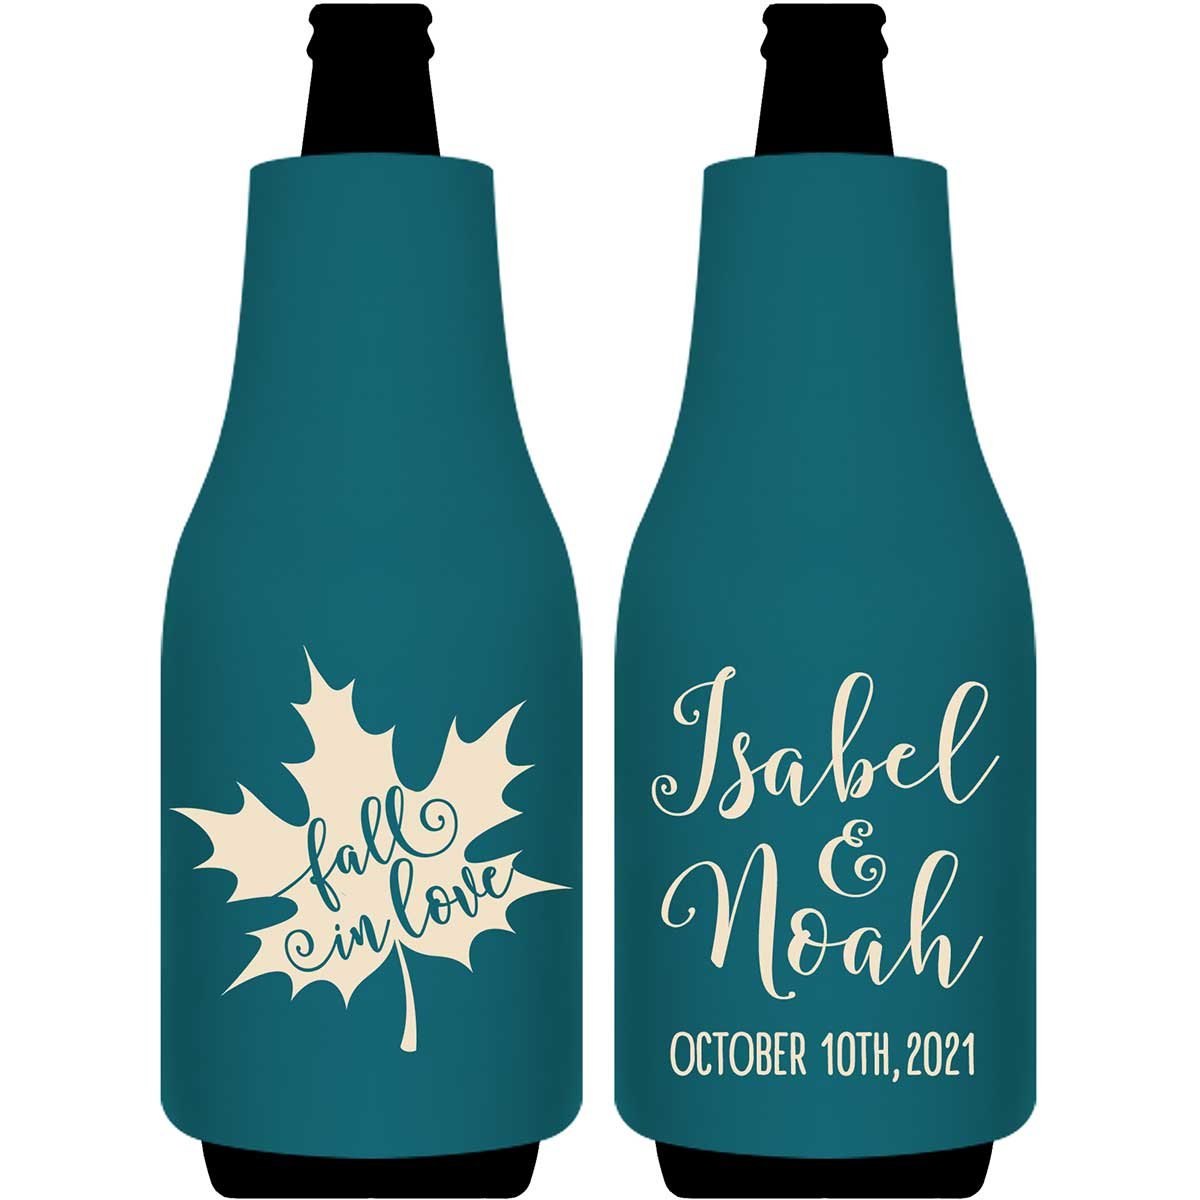 Fall In Love 5A Foldable Bottle Sleeve Koozies Wedding Gifts for Guests